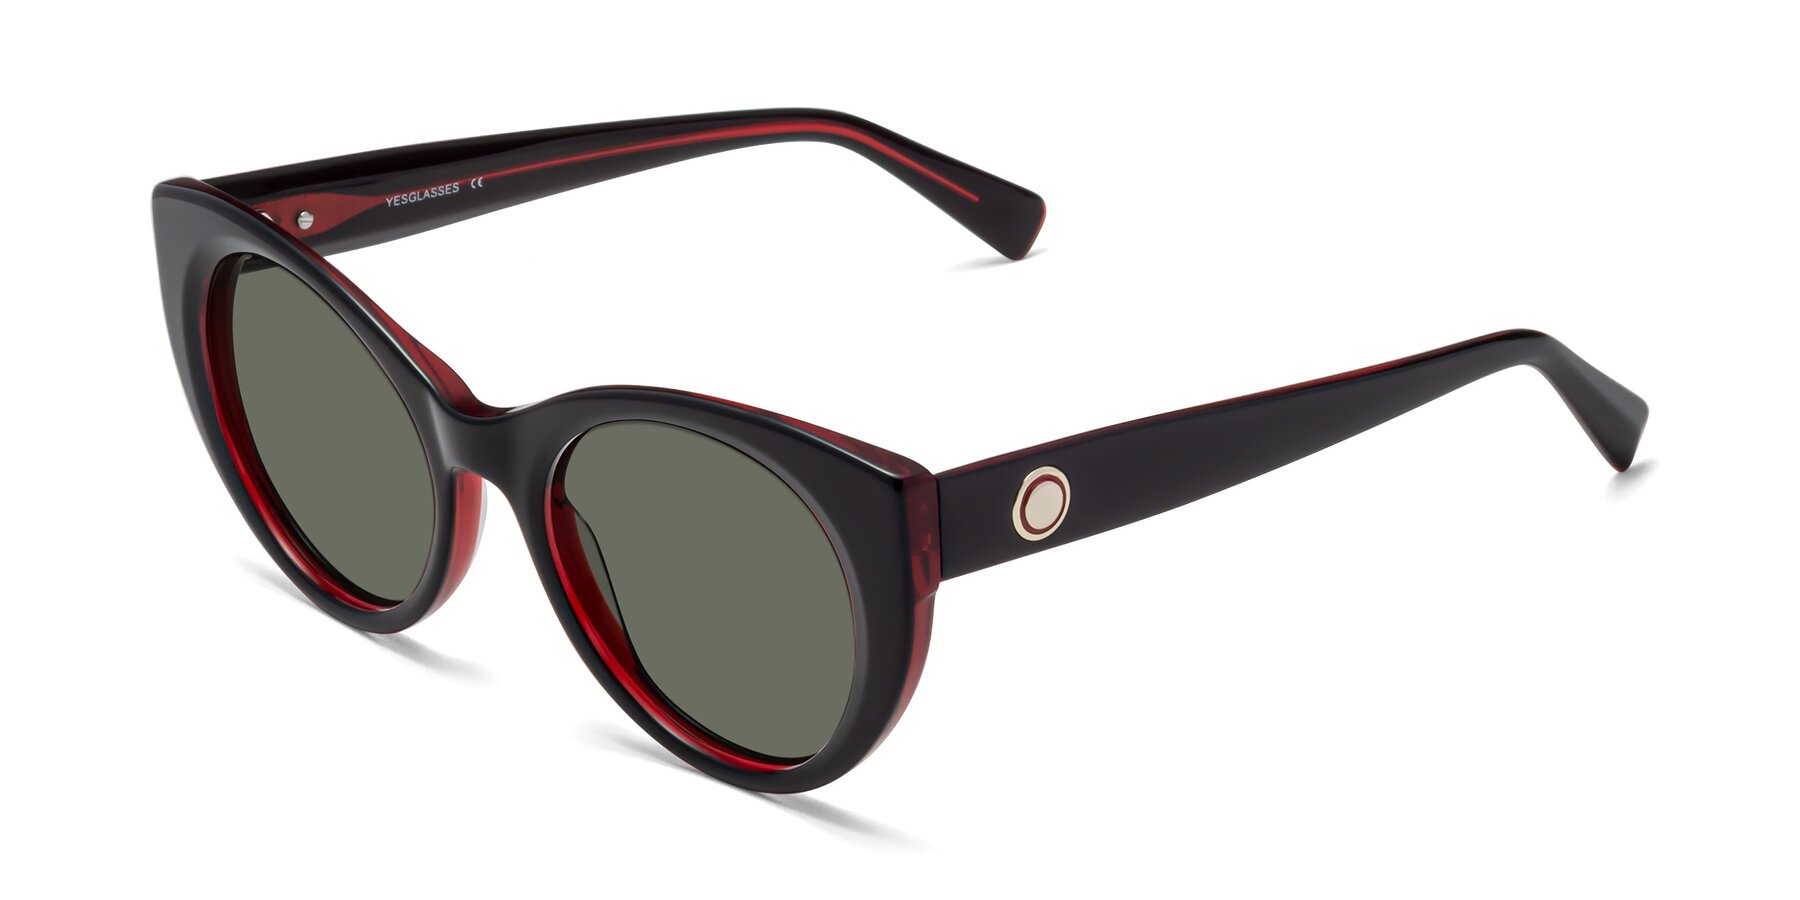 Angle of 1575 in Black-Wine with Gray Polarized Lenses